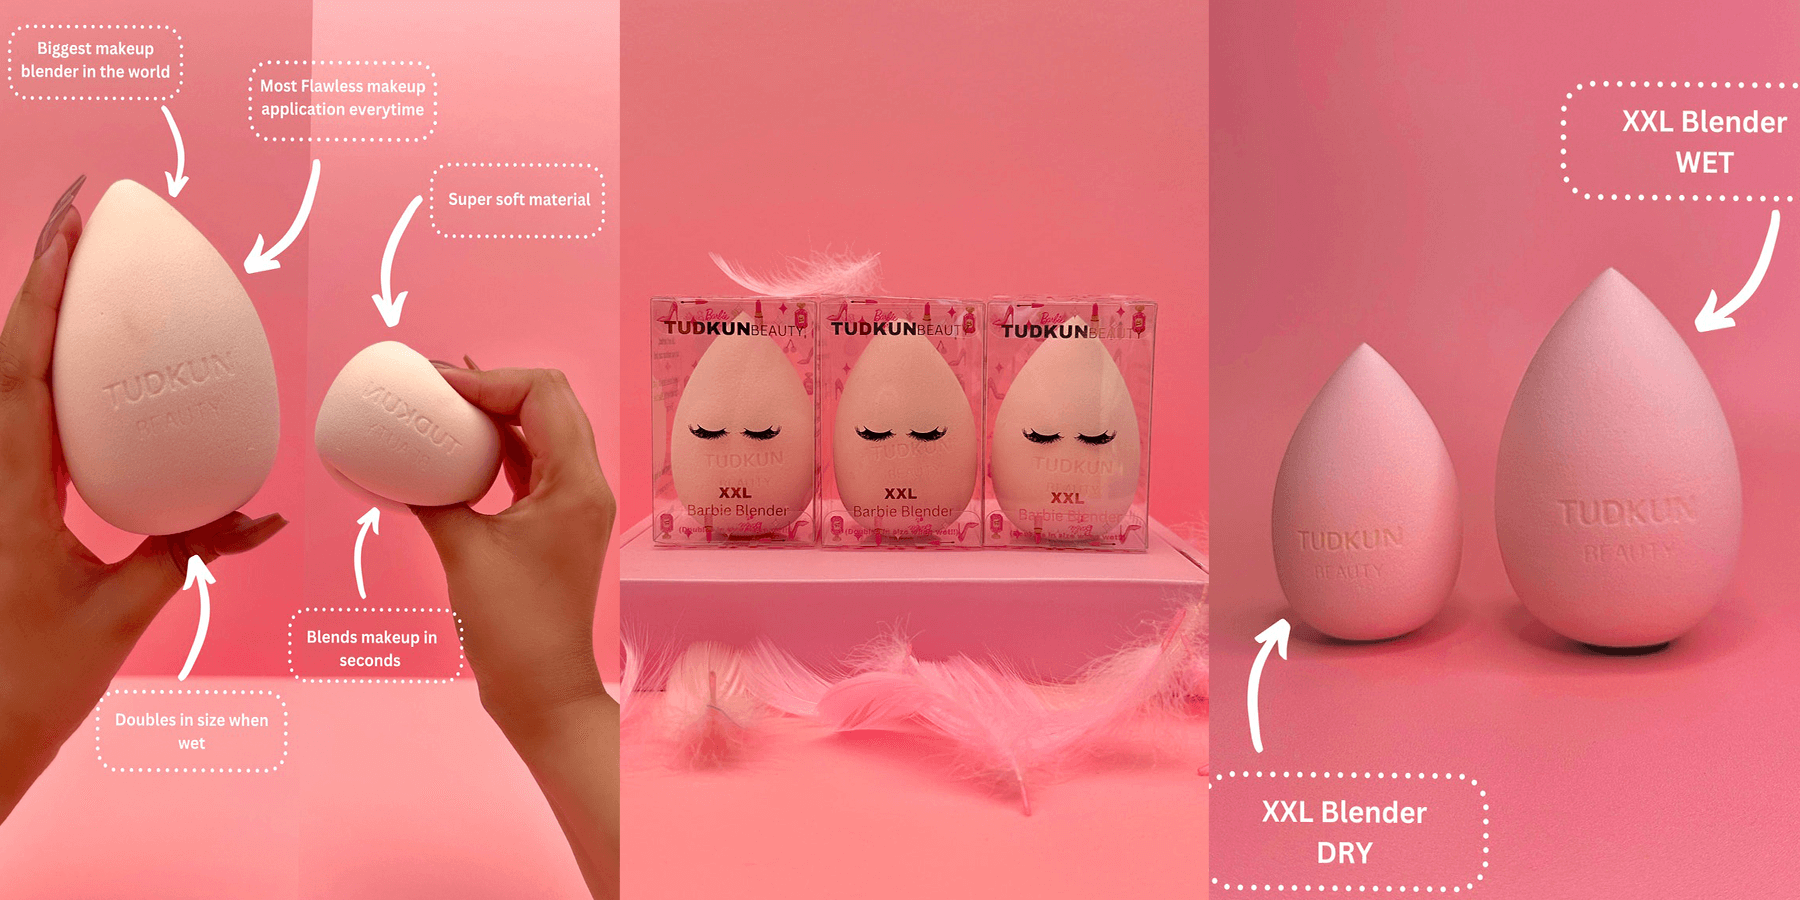 Achieve seamless makeup application with the Ultimate Beauty Blender Sponge.